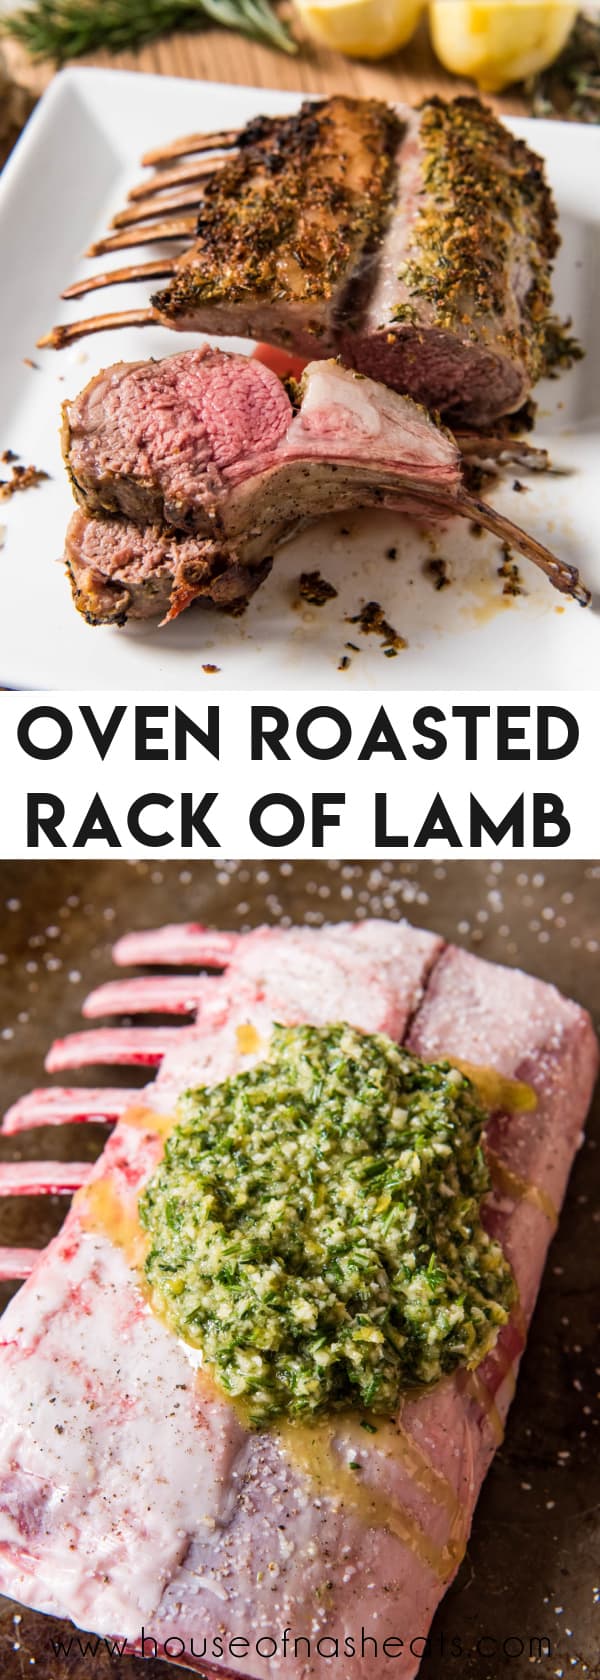 A collage of rack of lamb images with text overlay.